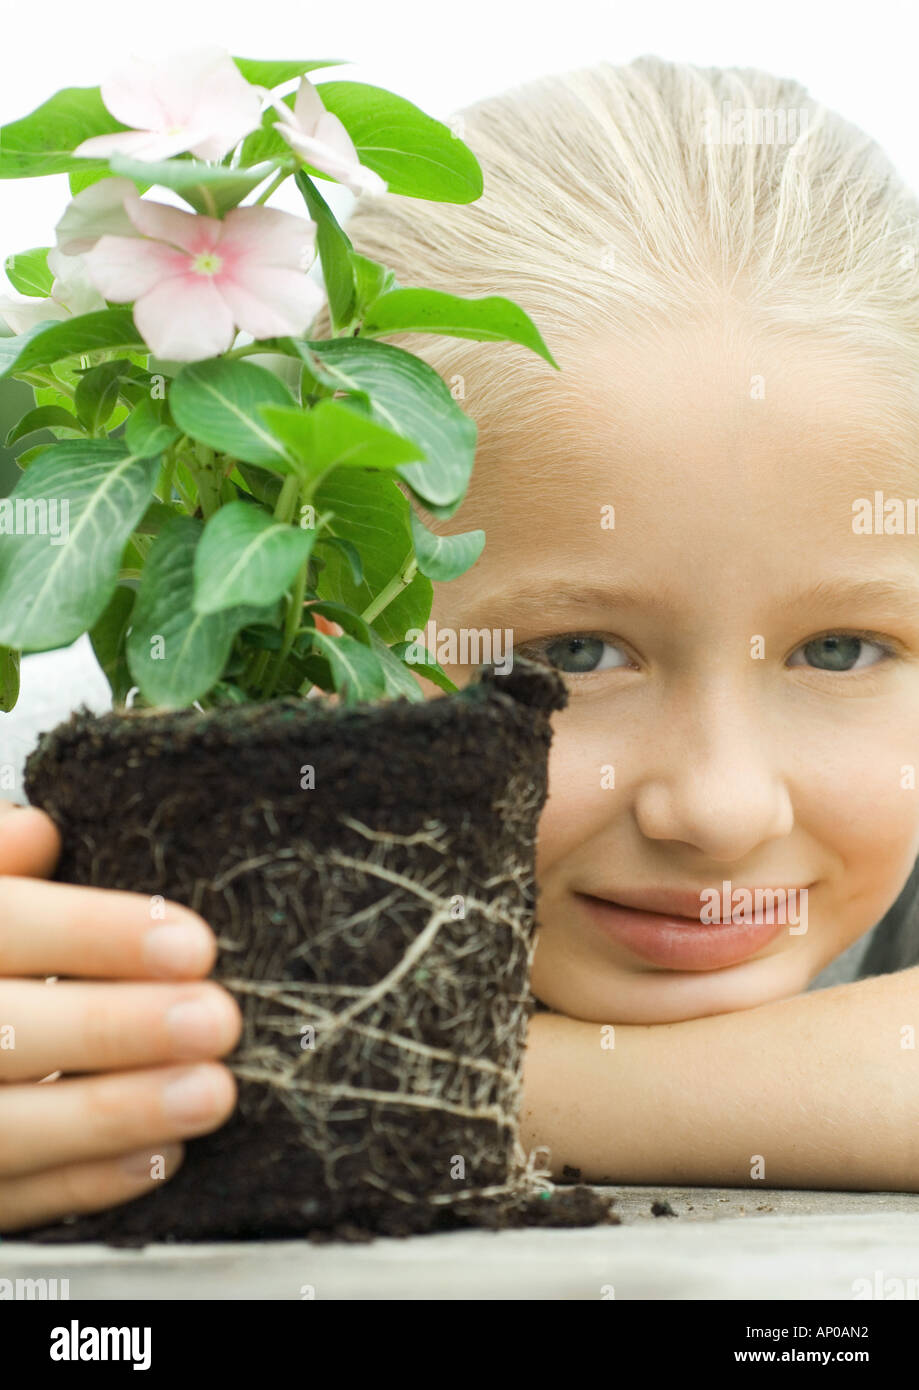 Girl with unpotted plant, smiling Stock Photo